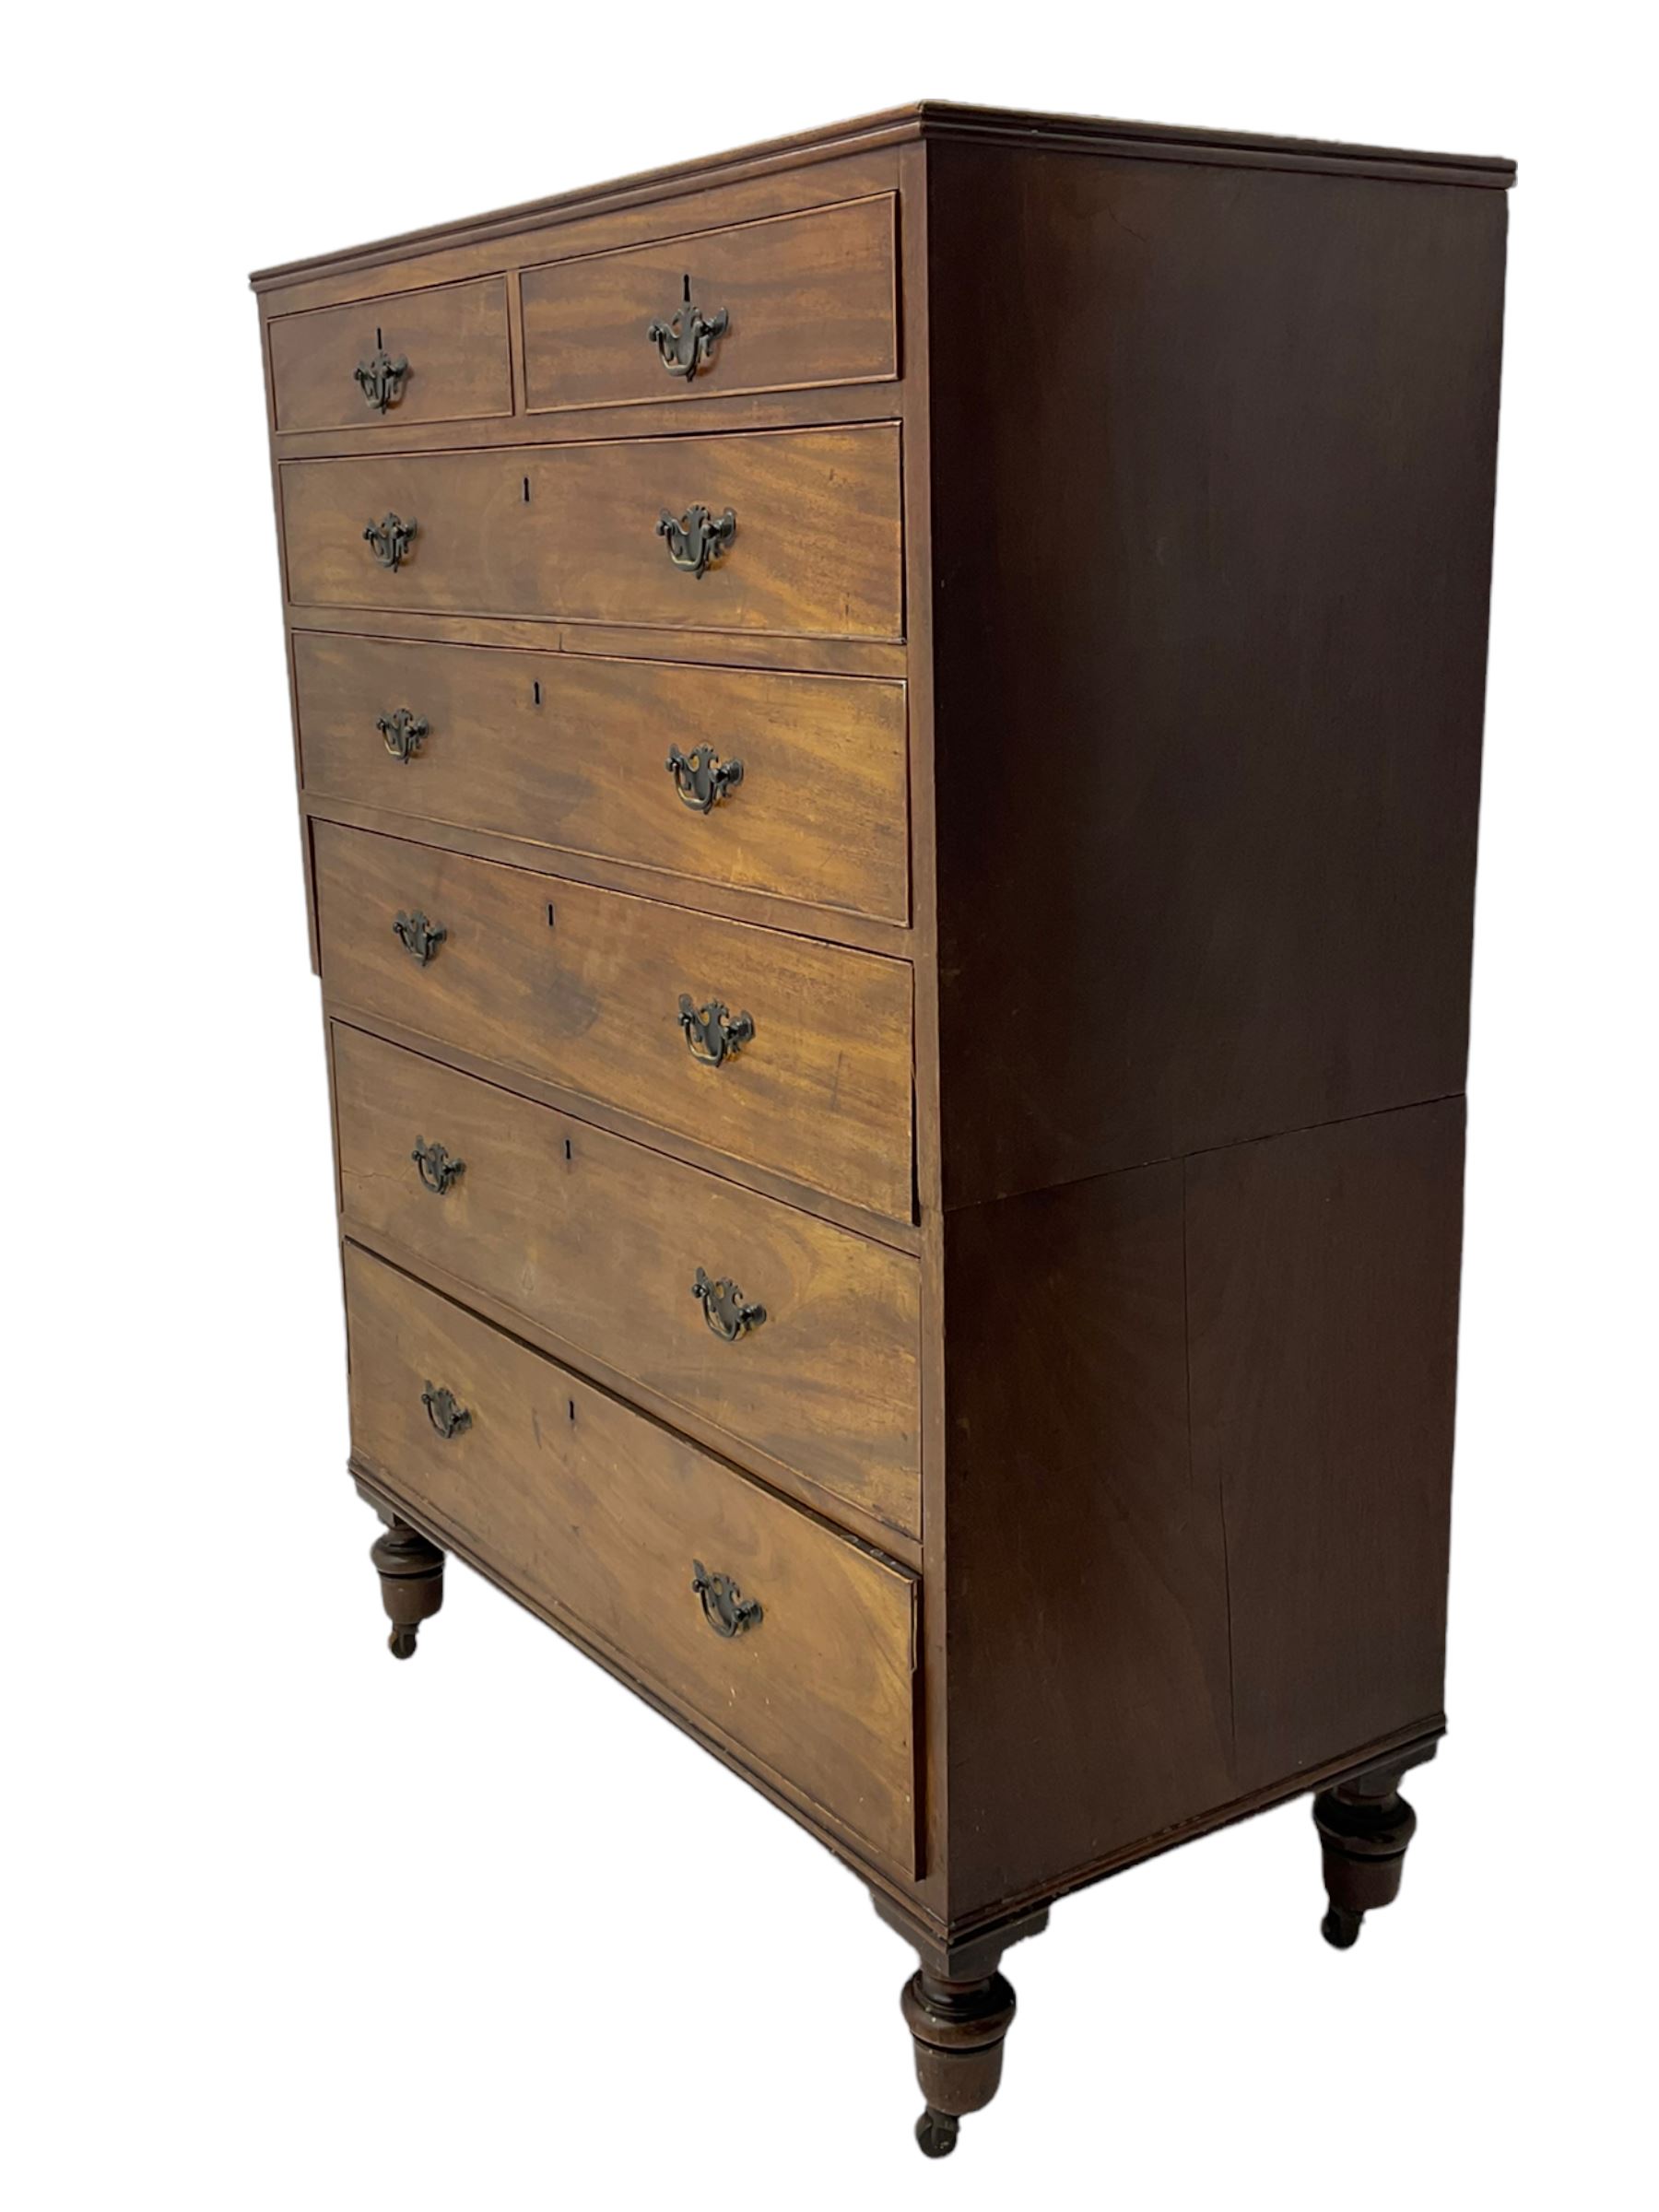 19th century mahogany straight front chest - Image 8 of 8